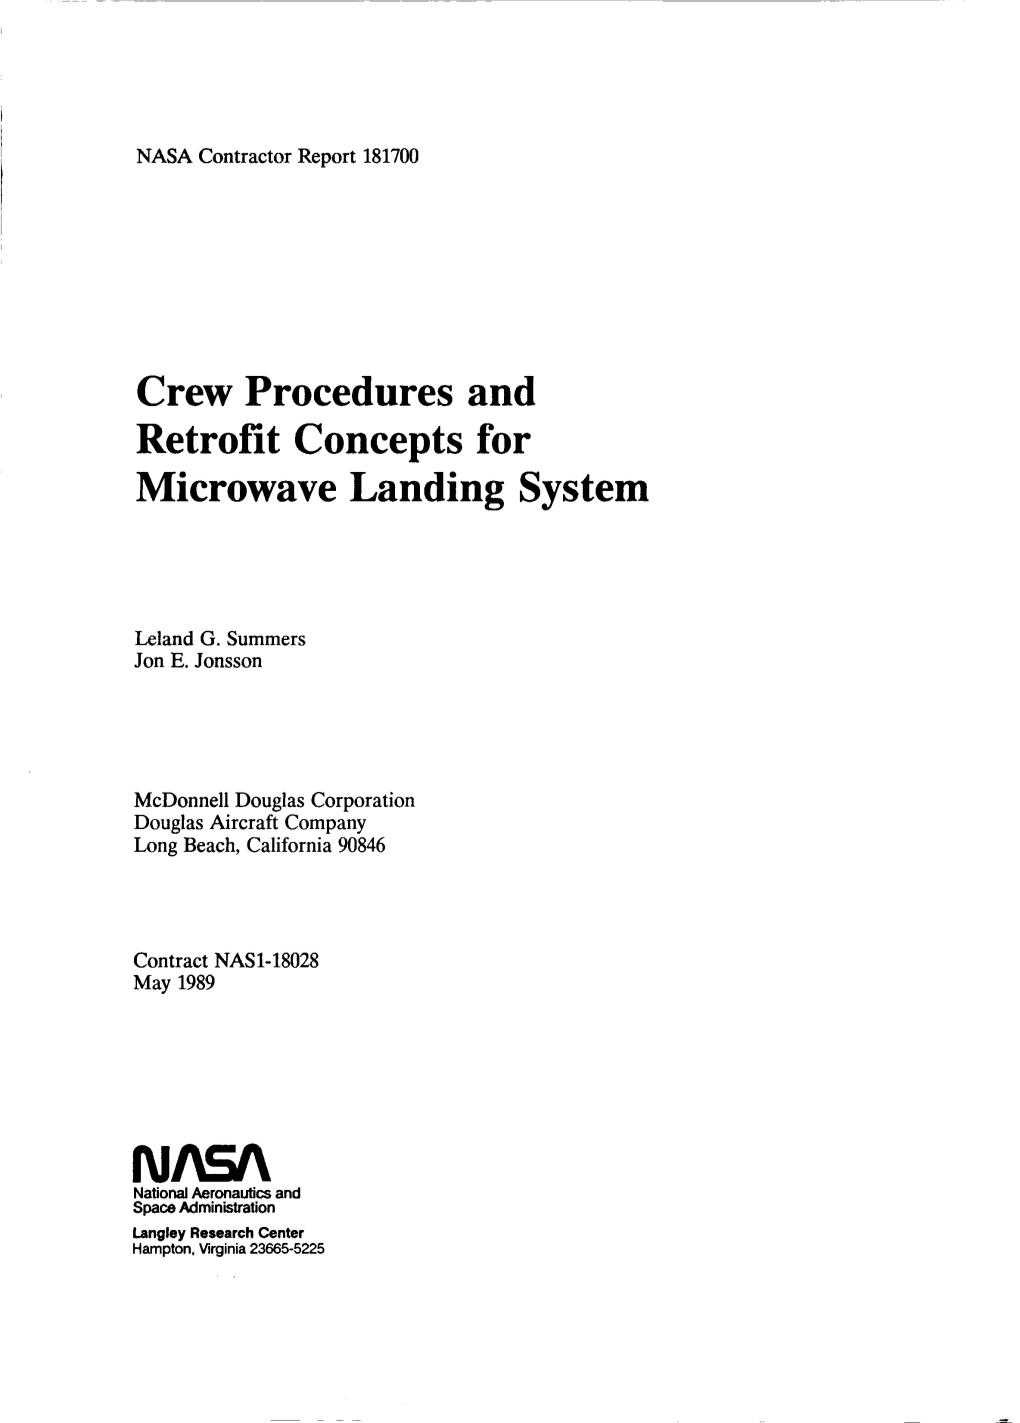 Crew Procedures and Retrofit Concepts for Microwave Landing System